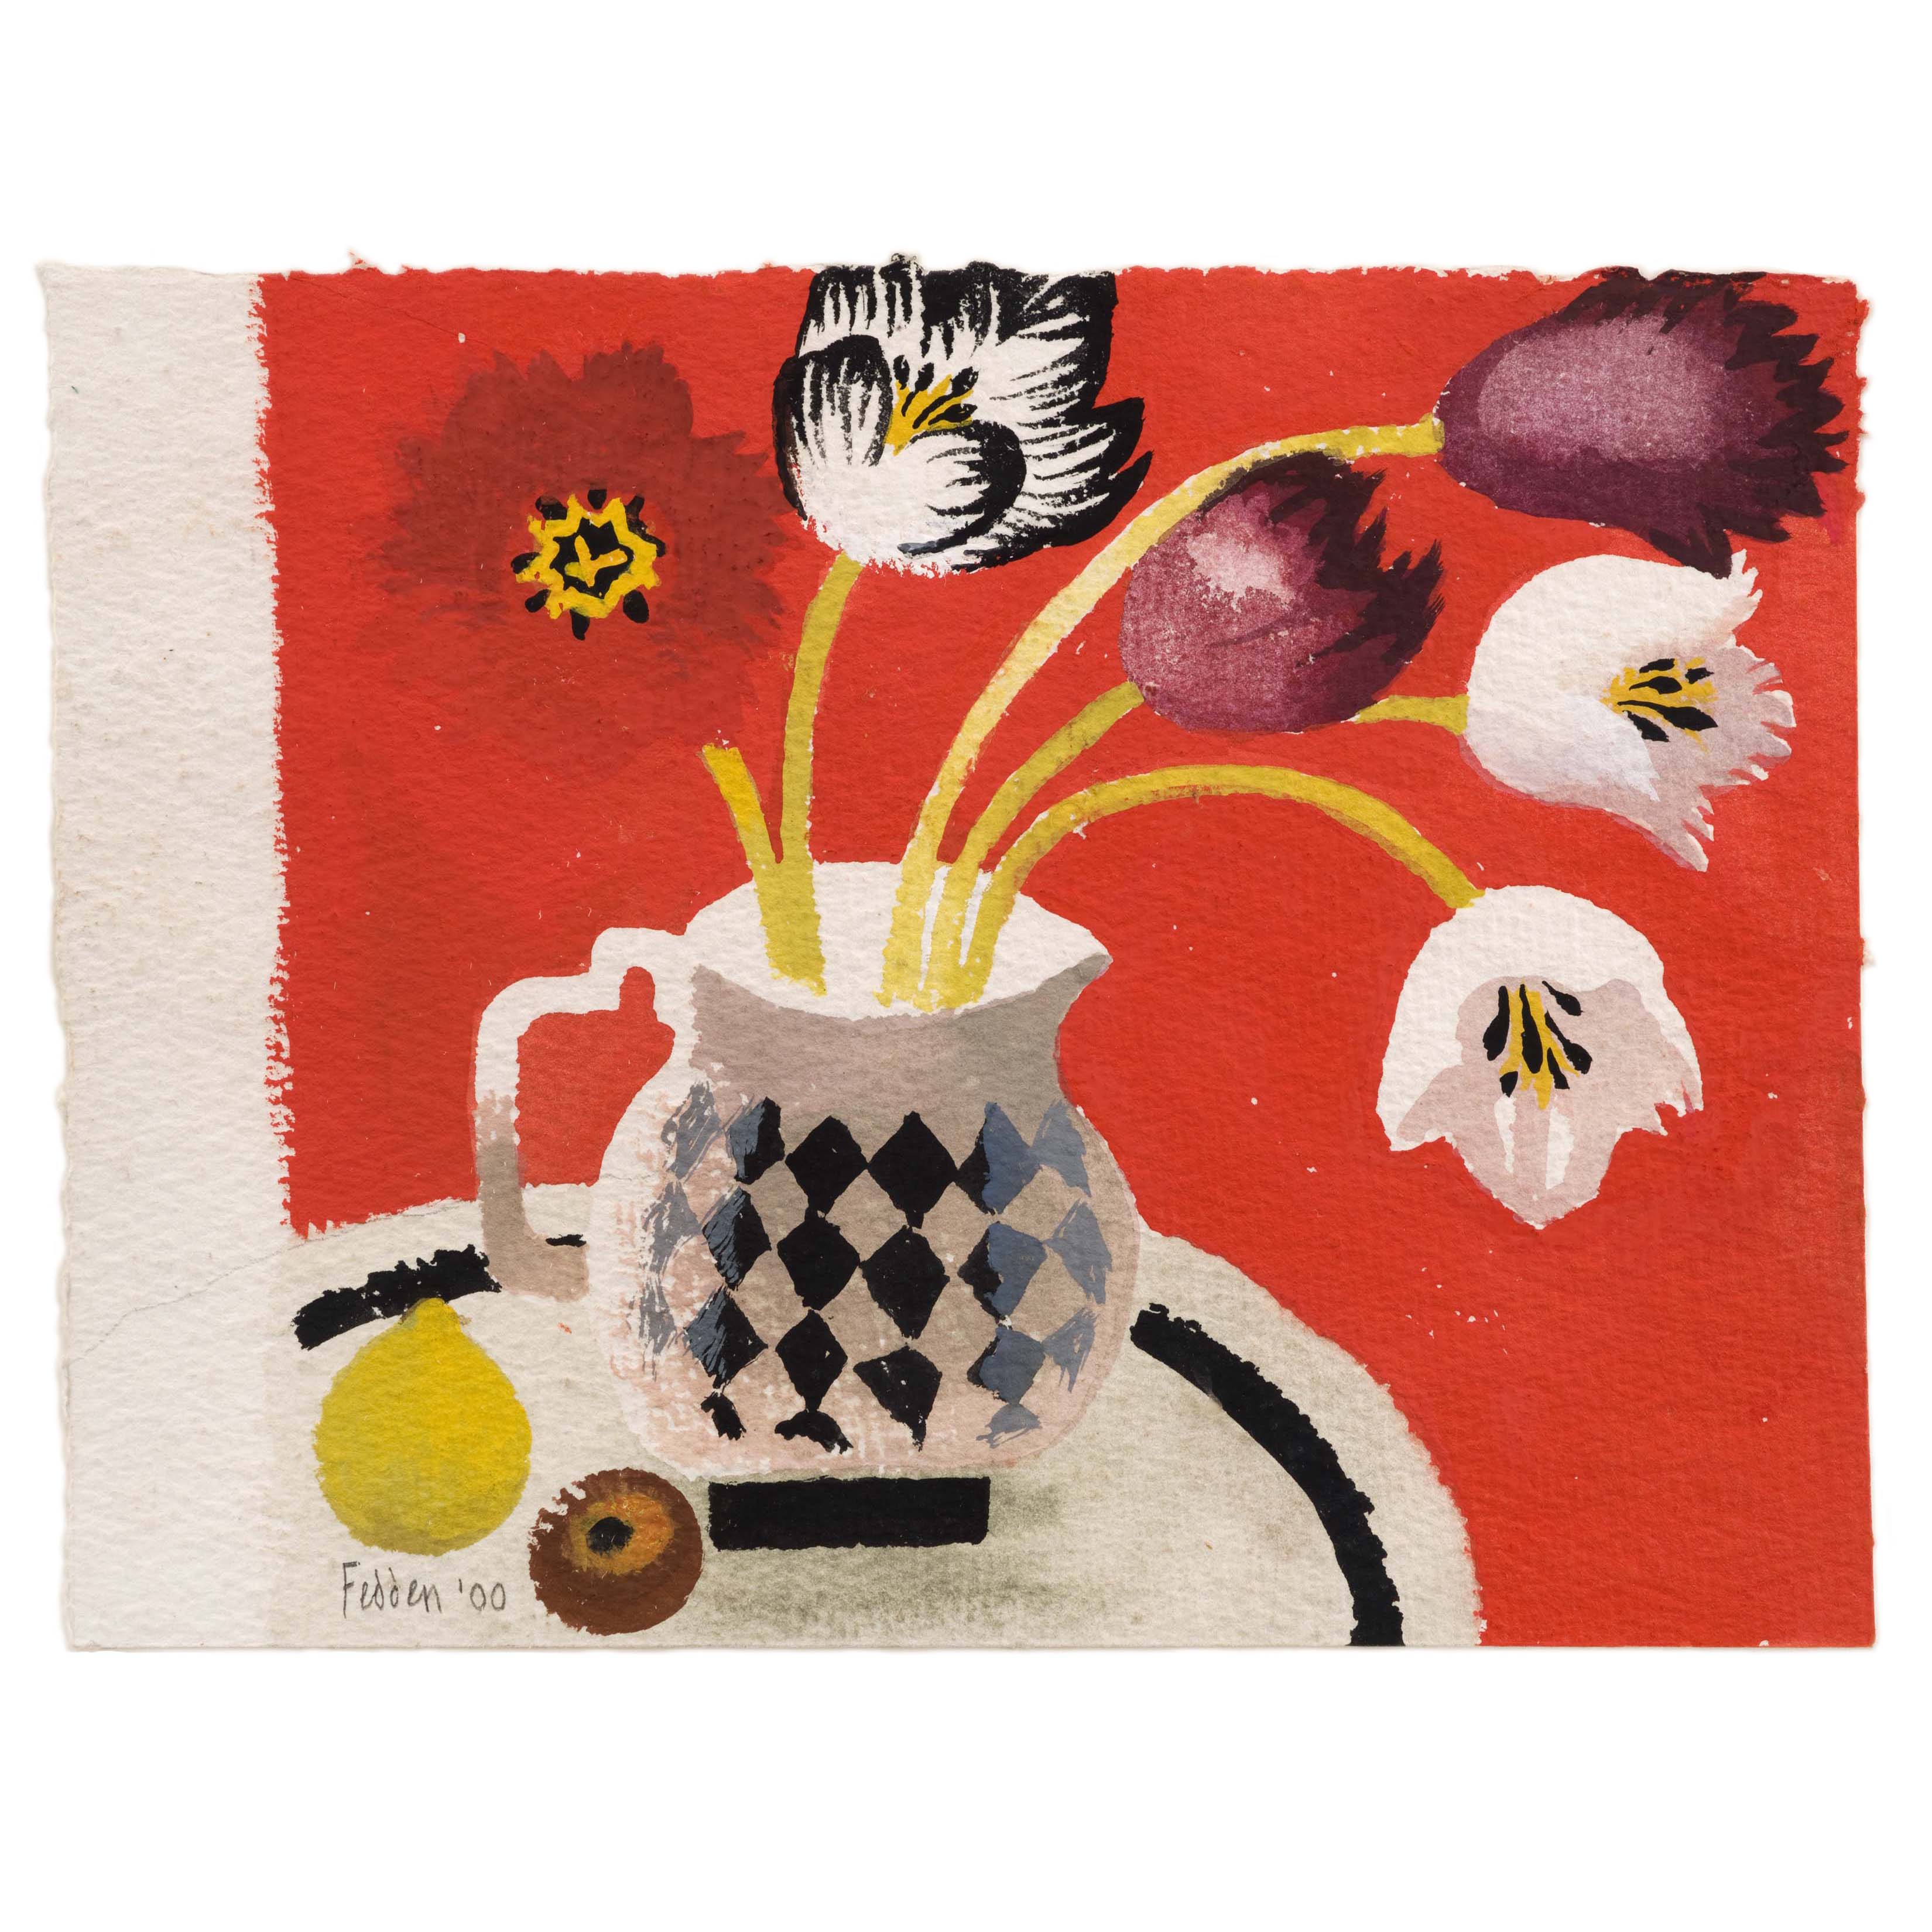 MARY FEDDEN. TULIPS ON RED. 2000. SOLD